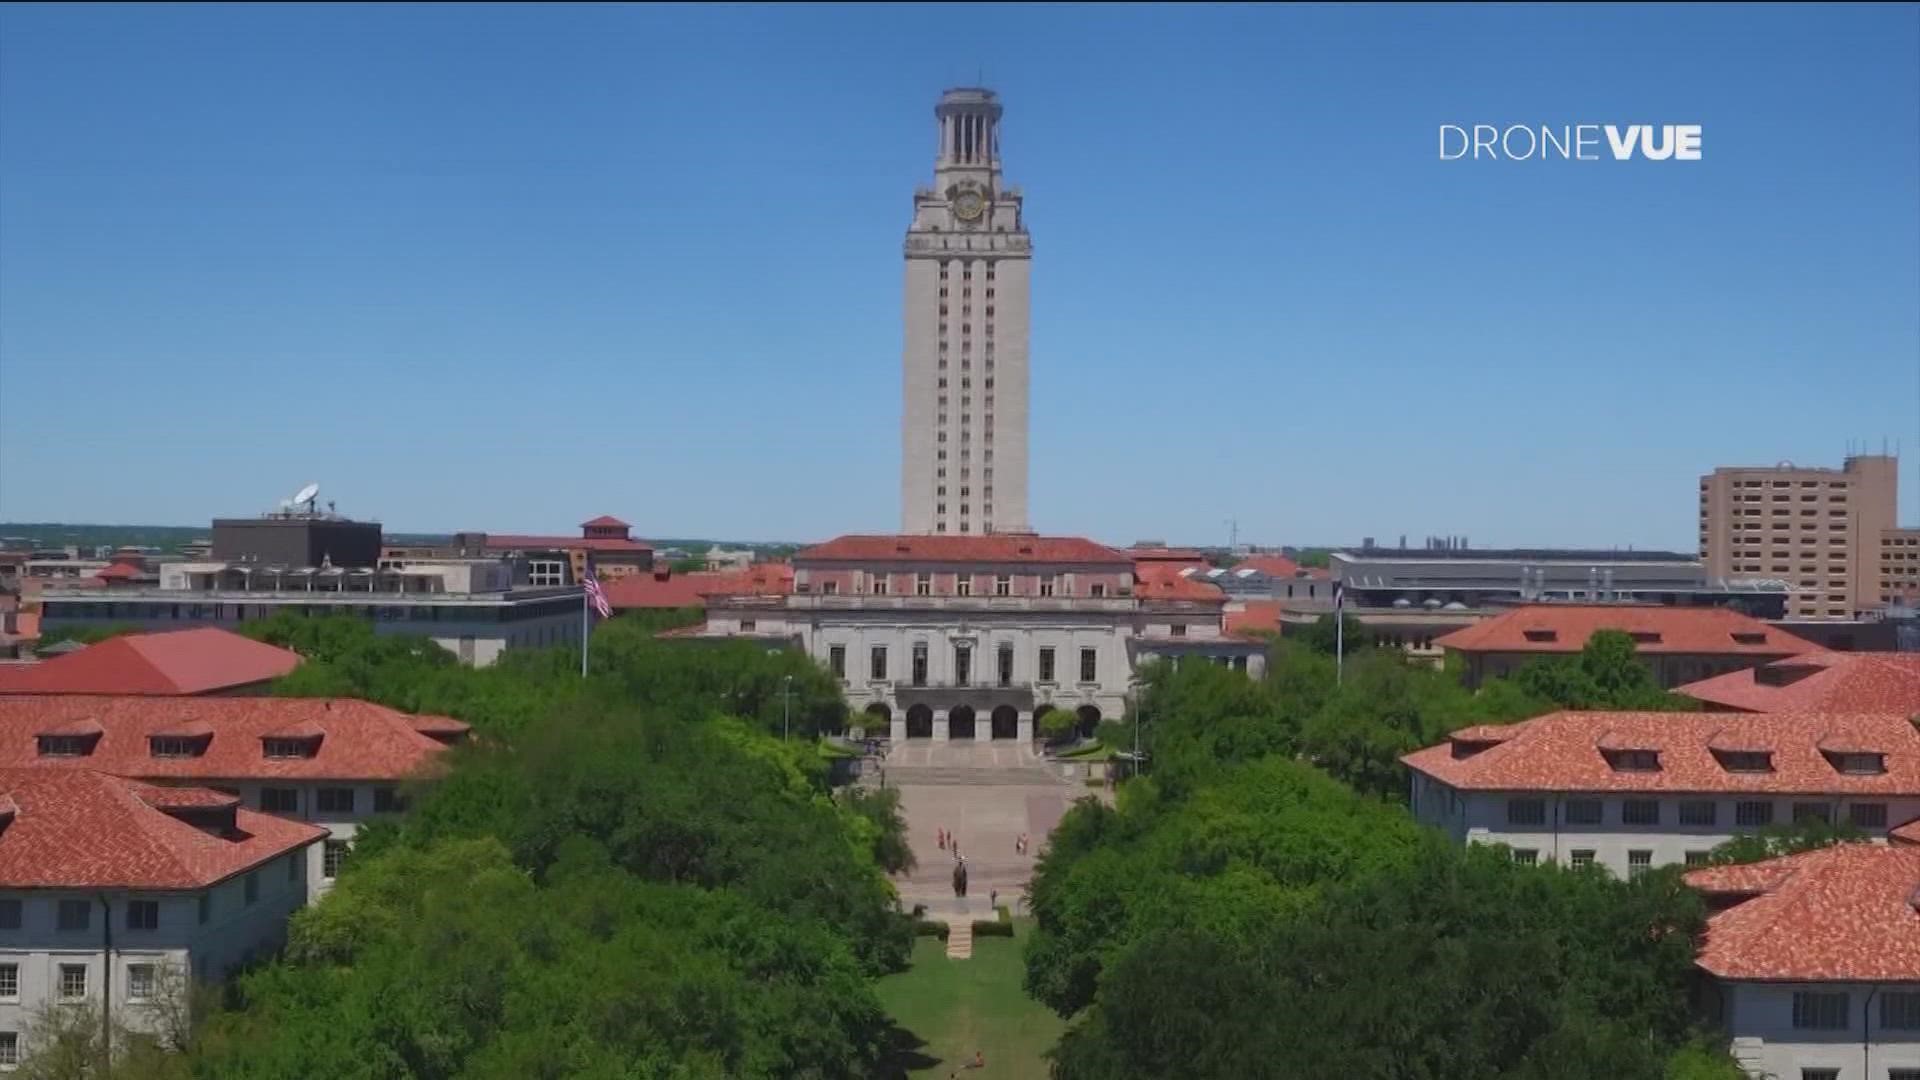 UT said it improved the graduation rates by implementing a variety of programs to improve student success and provide support in students' goals toward their degree.